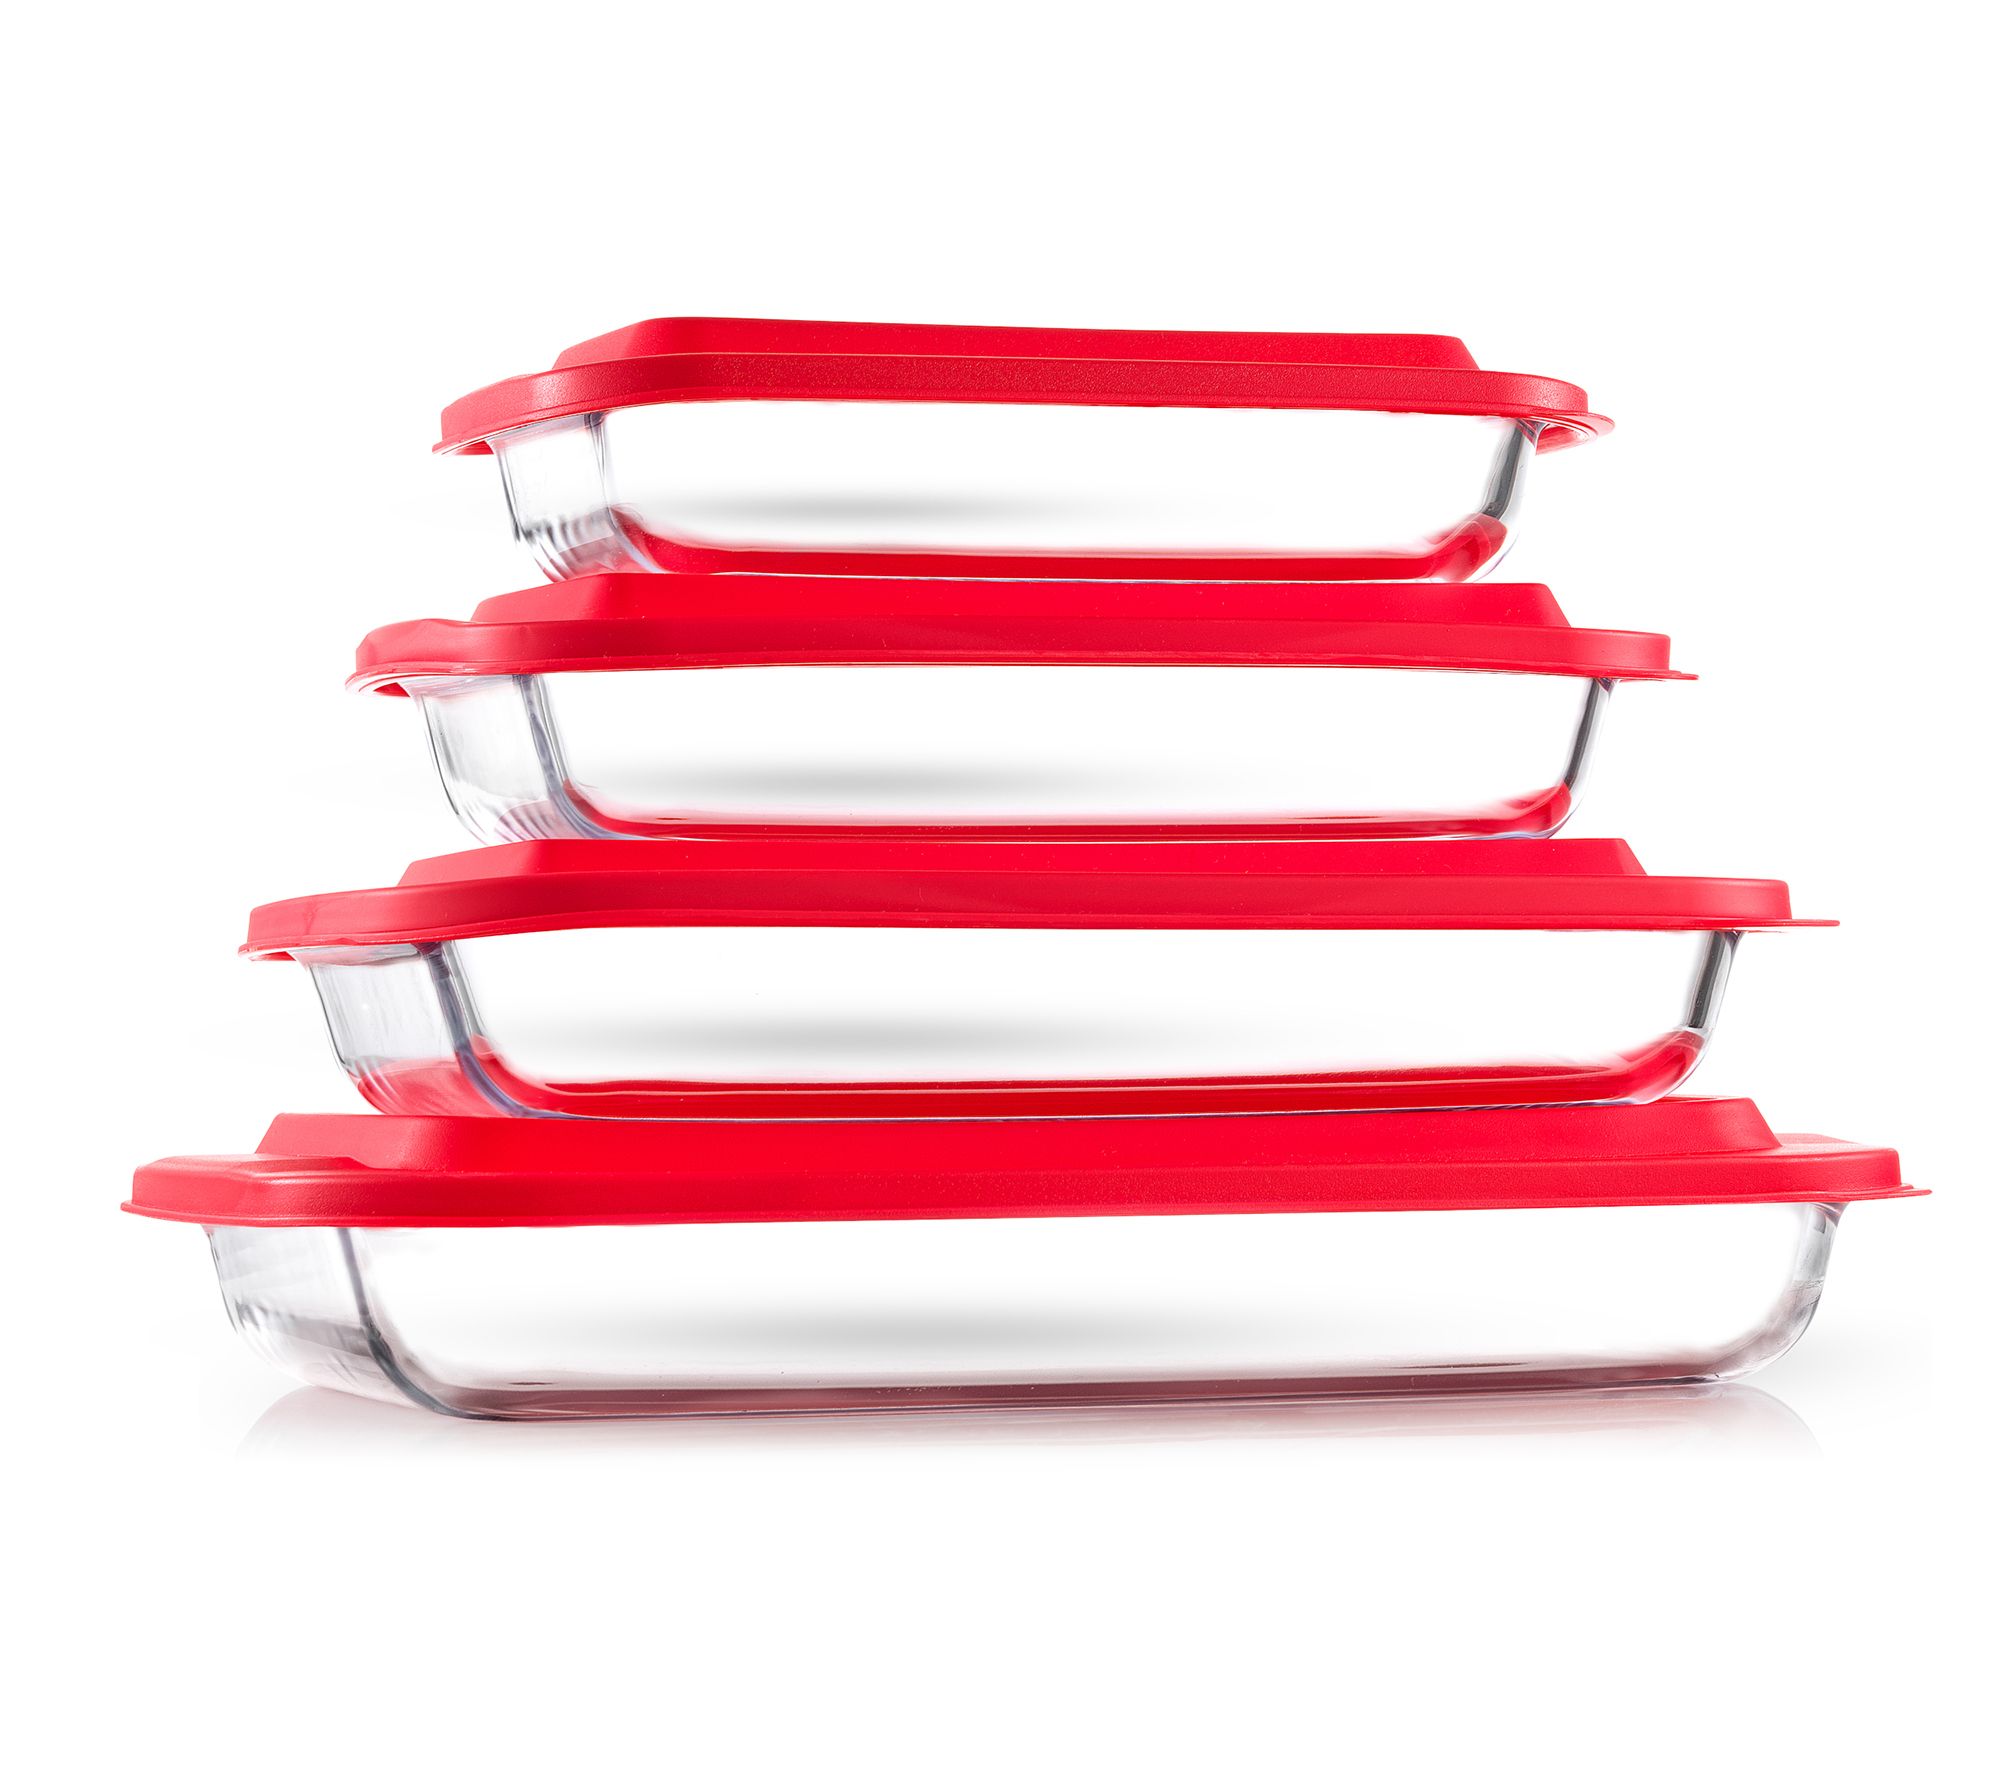 Save on Pyrex Round Dish Storage 4 Cup with Red Lid Order Online